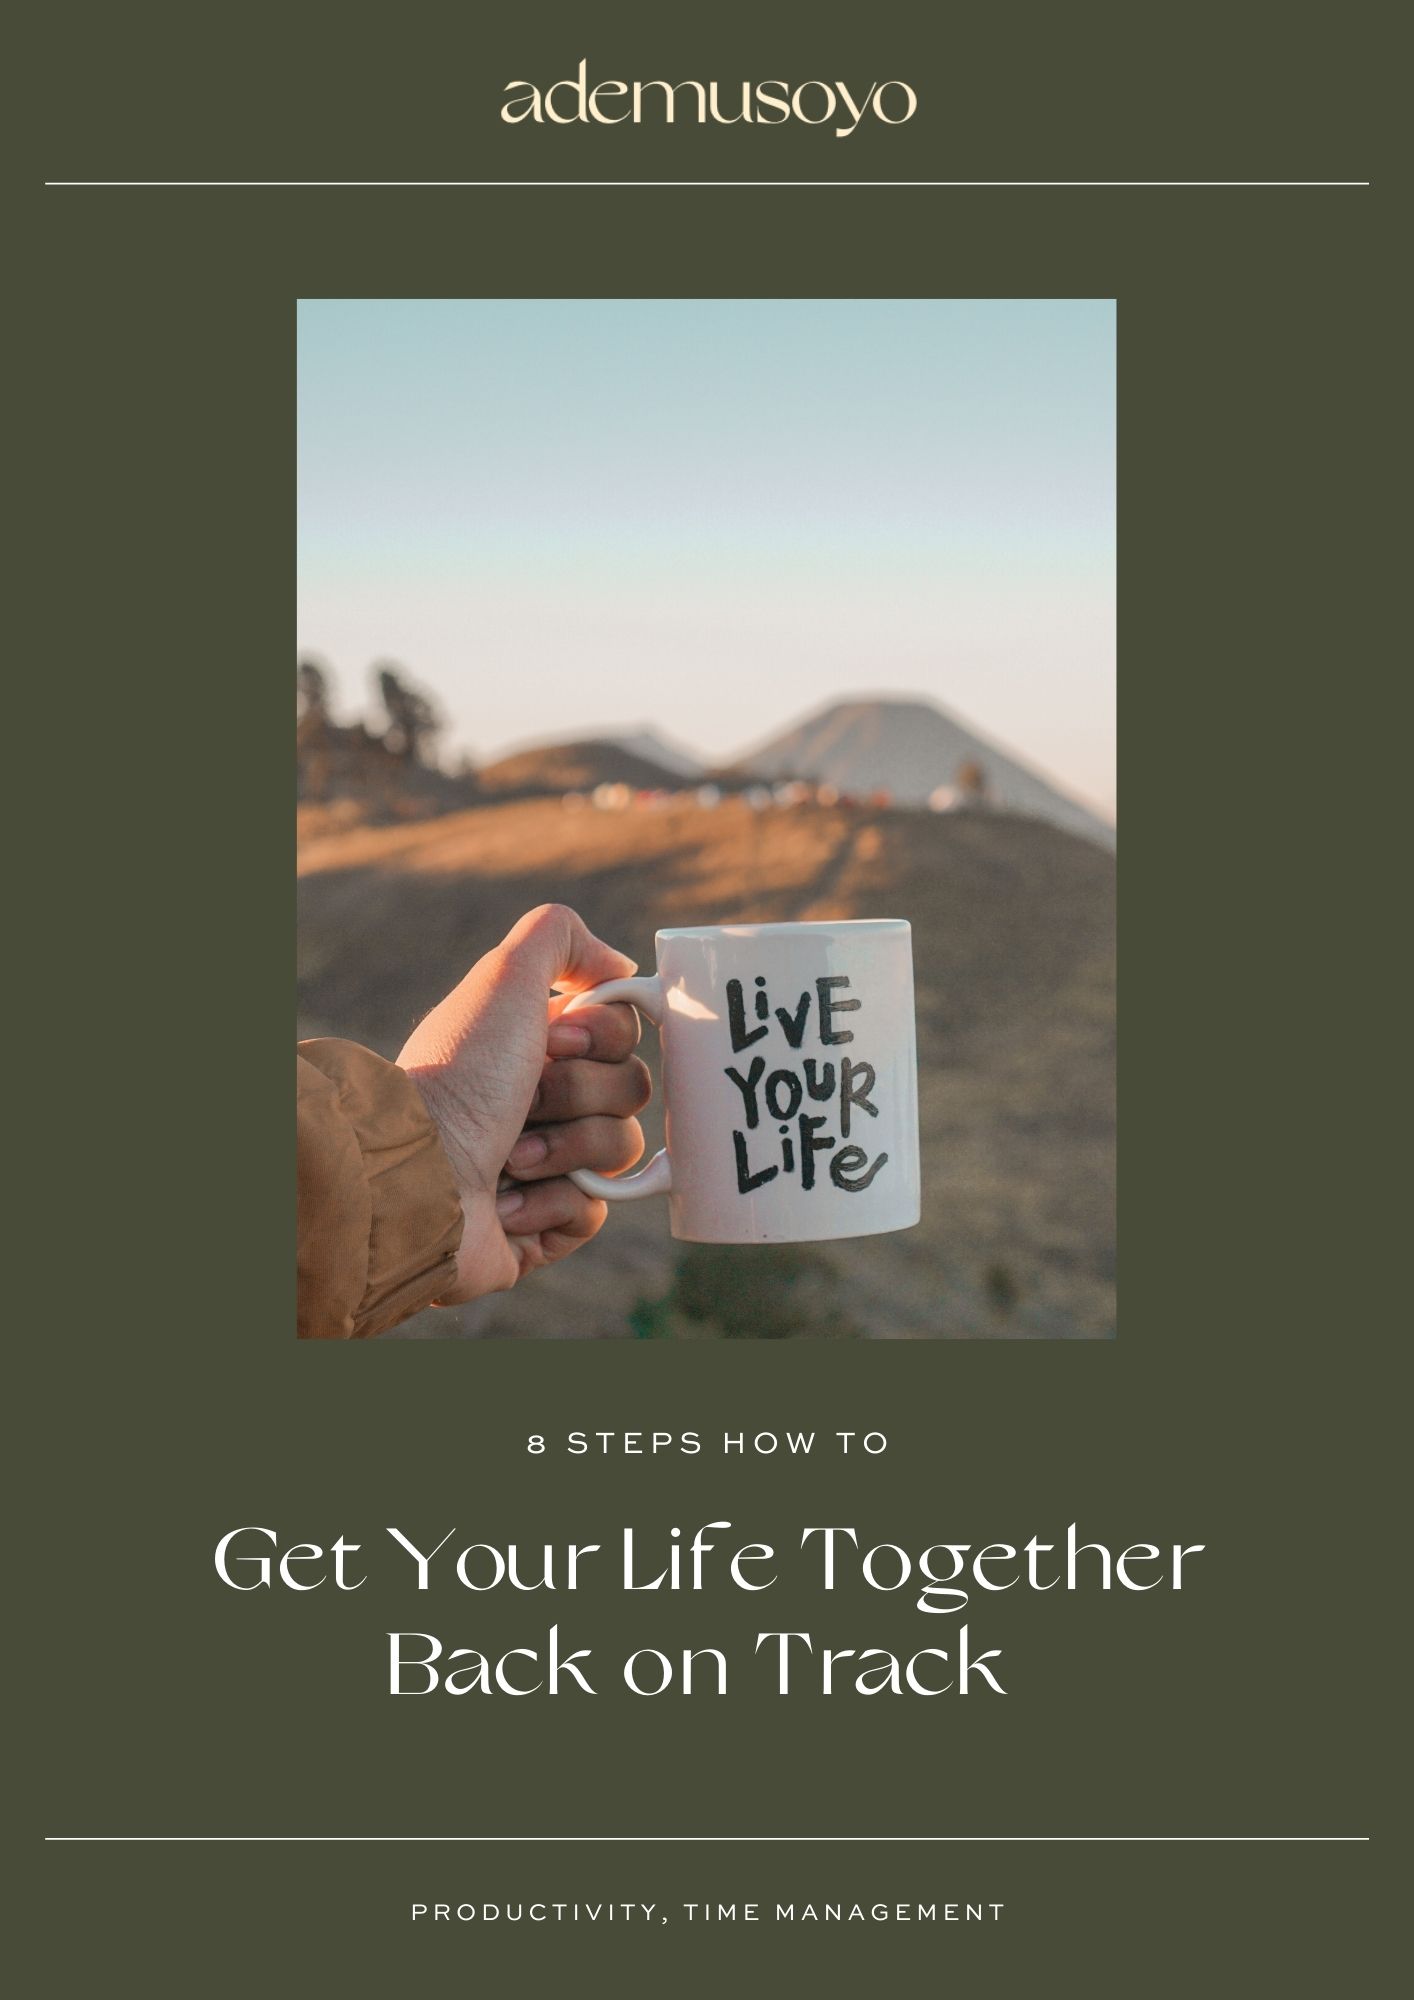 8 Steps How To Get Your Life Together Back on Track